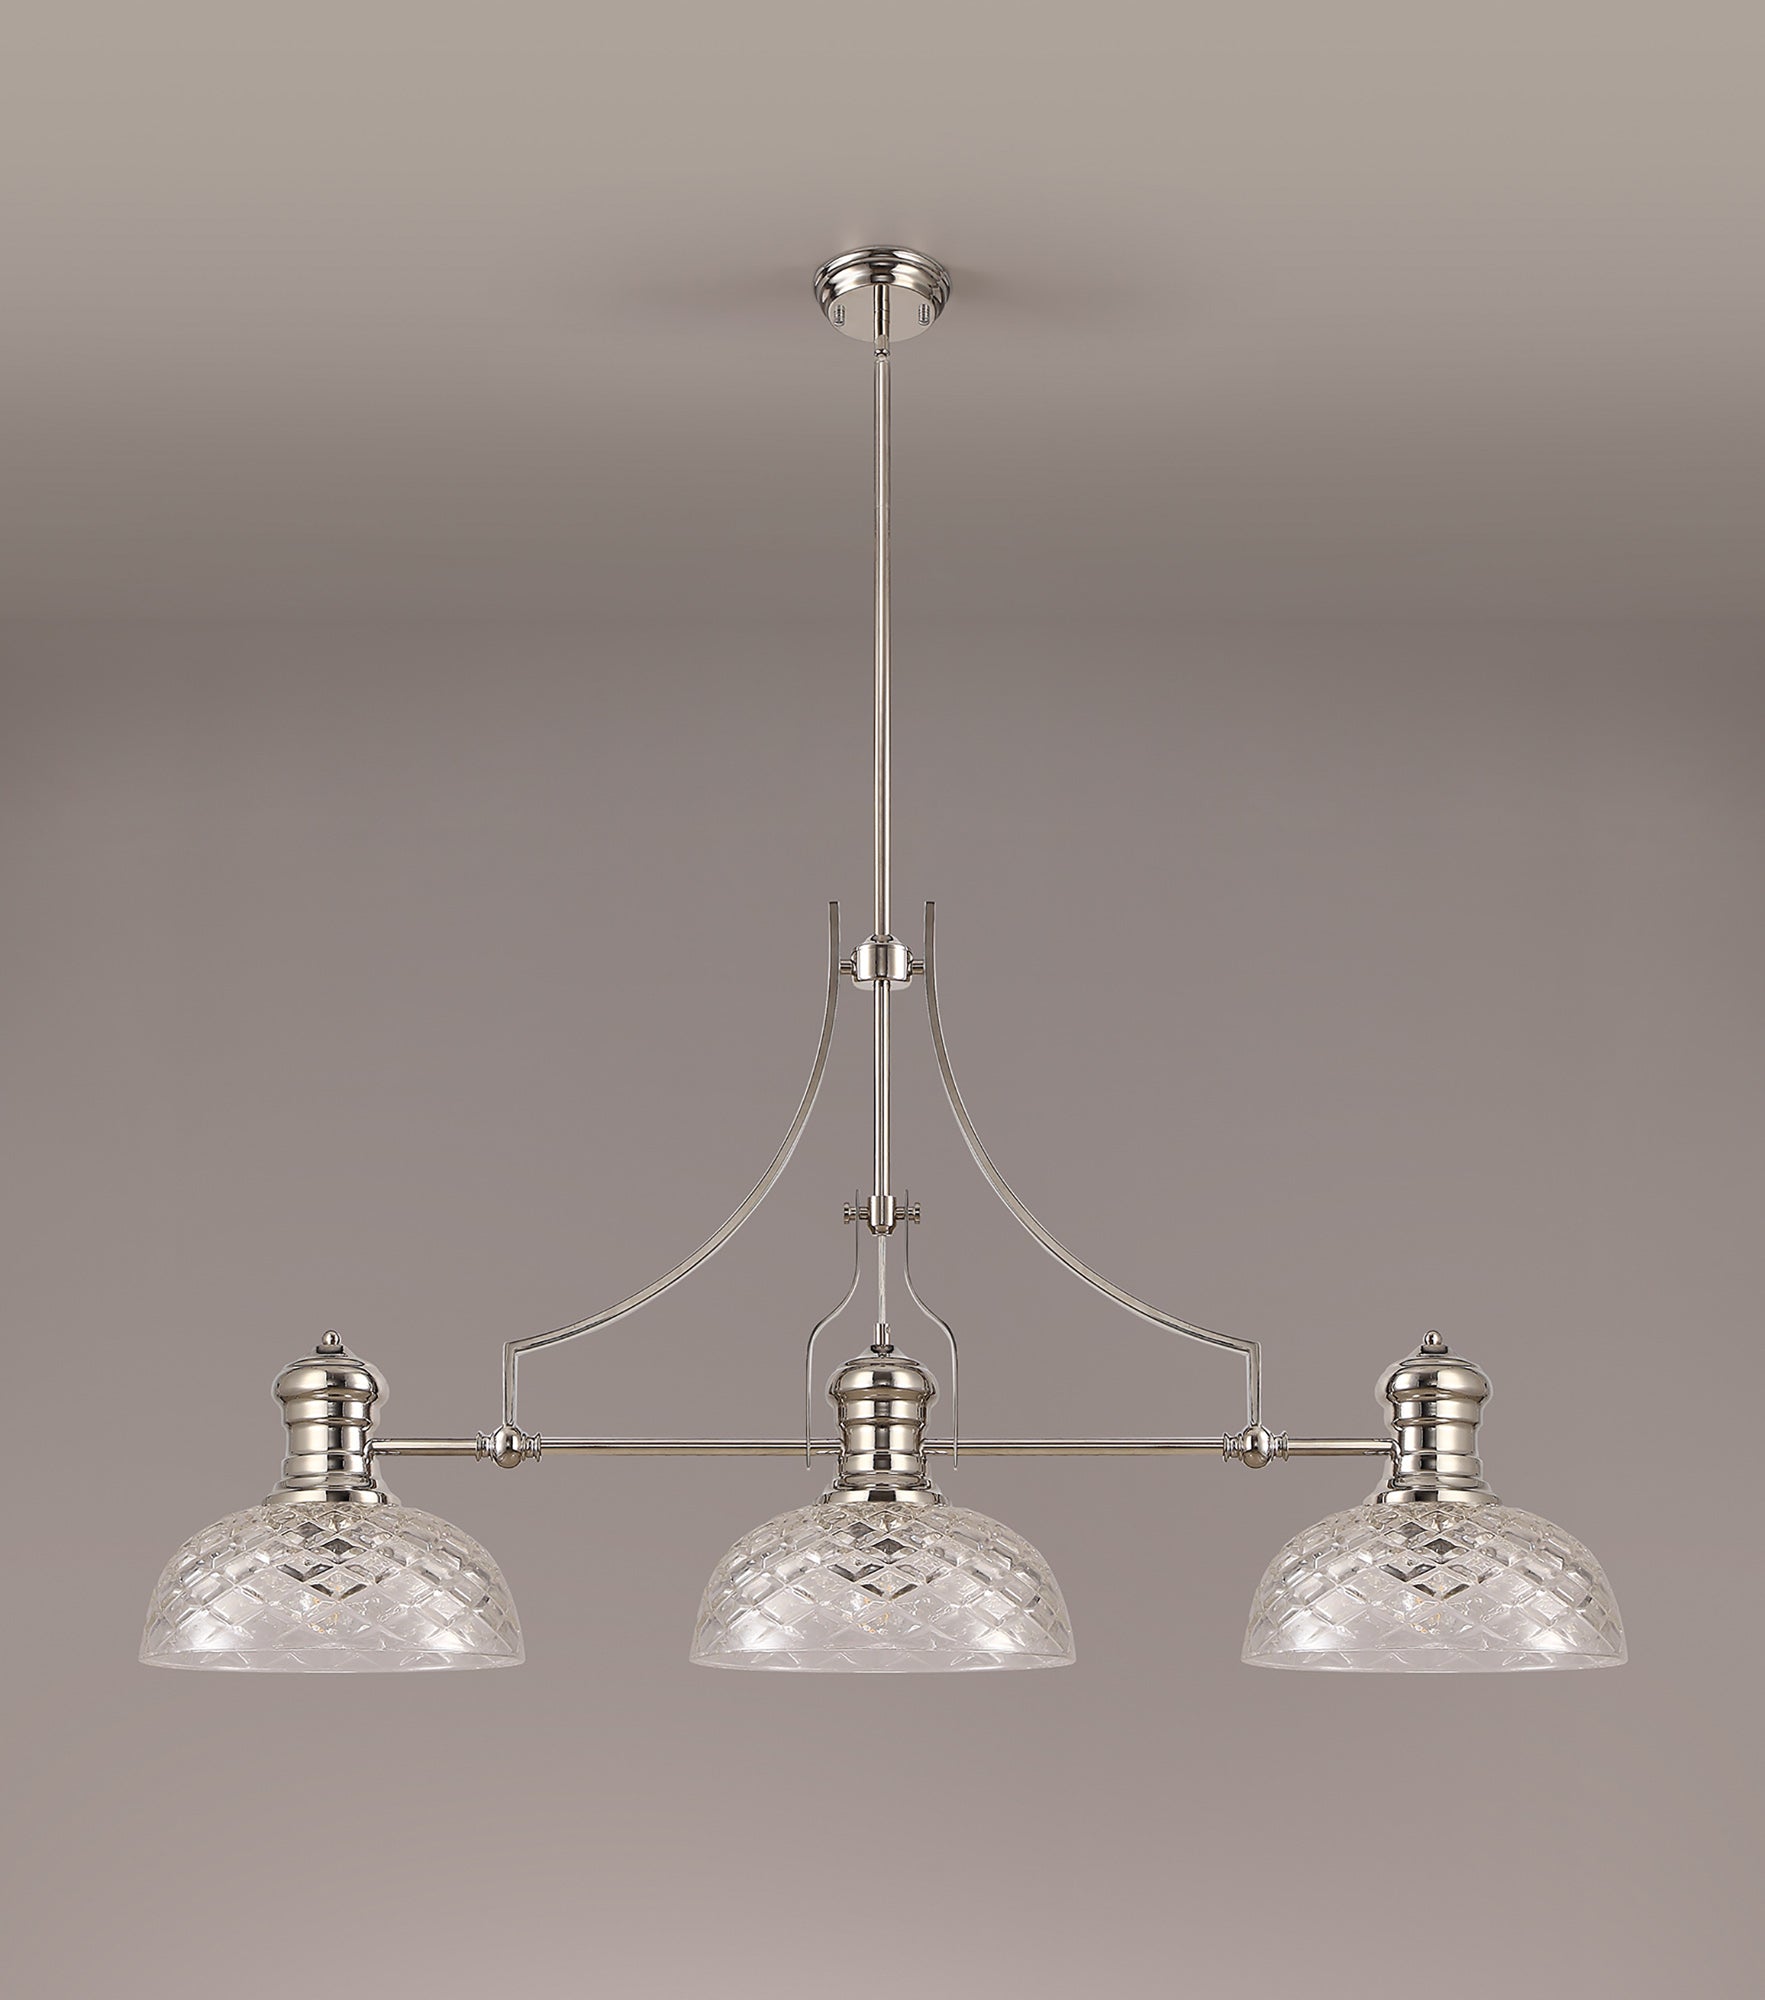 Docker Linear Pendant With 30cm Flat Round Patterned Shade, 3 x E27, Polished Nickel/Clear Glass LOK104833